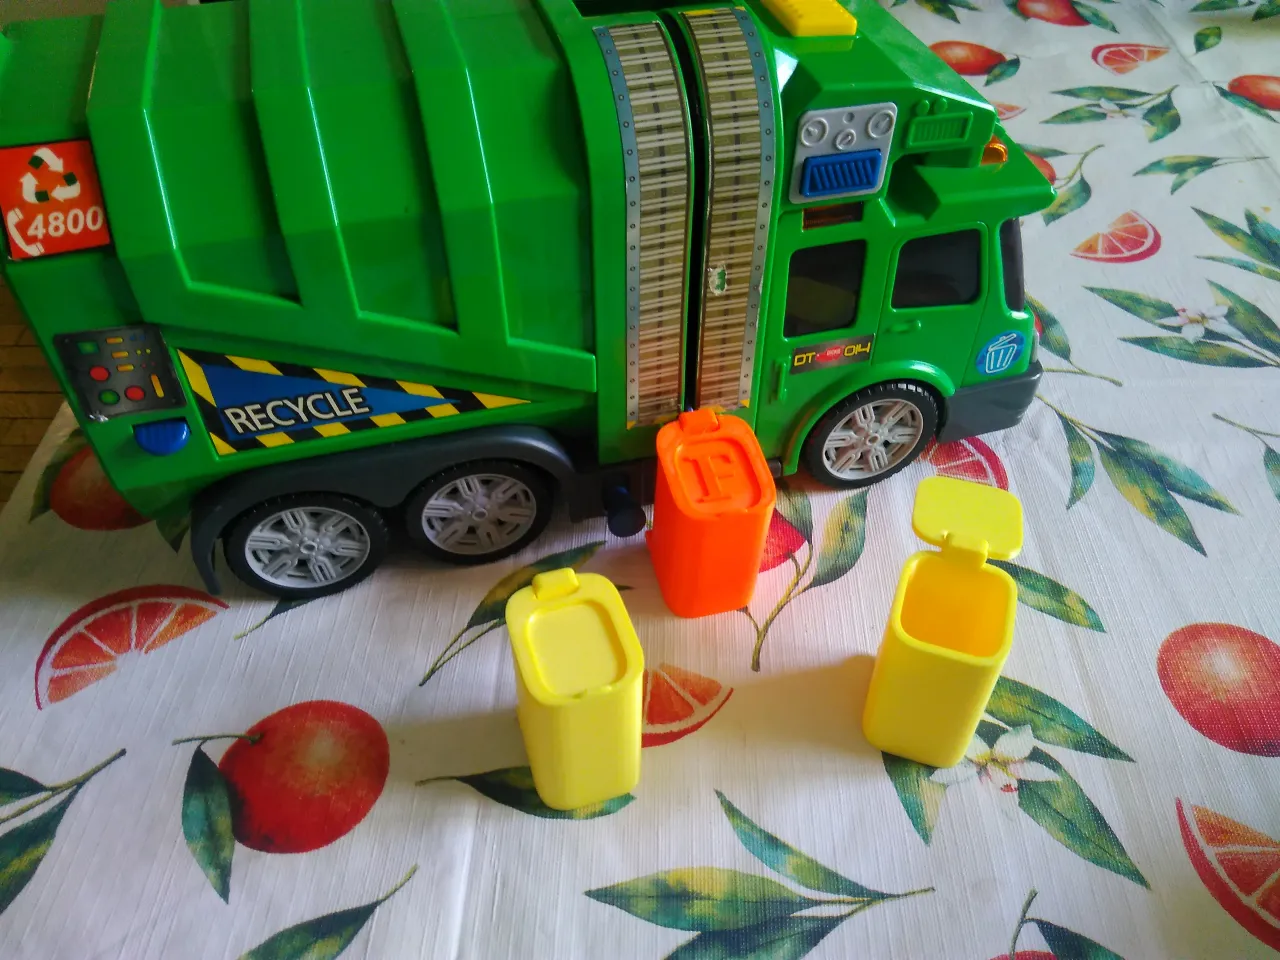 Dickie Toys - Le camion-poubelle Garbage Truck